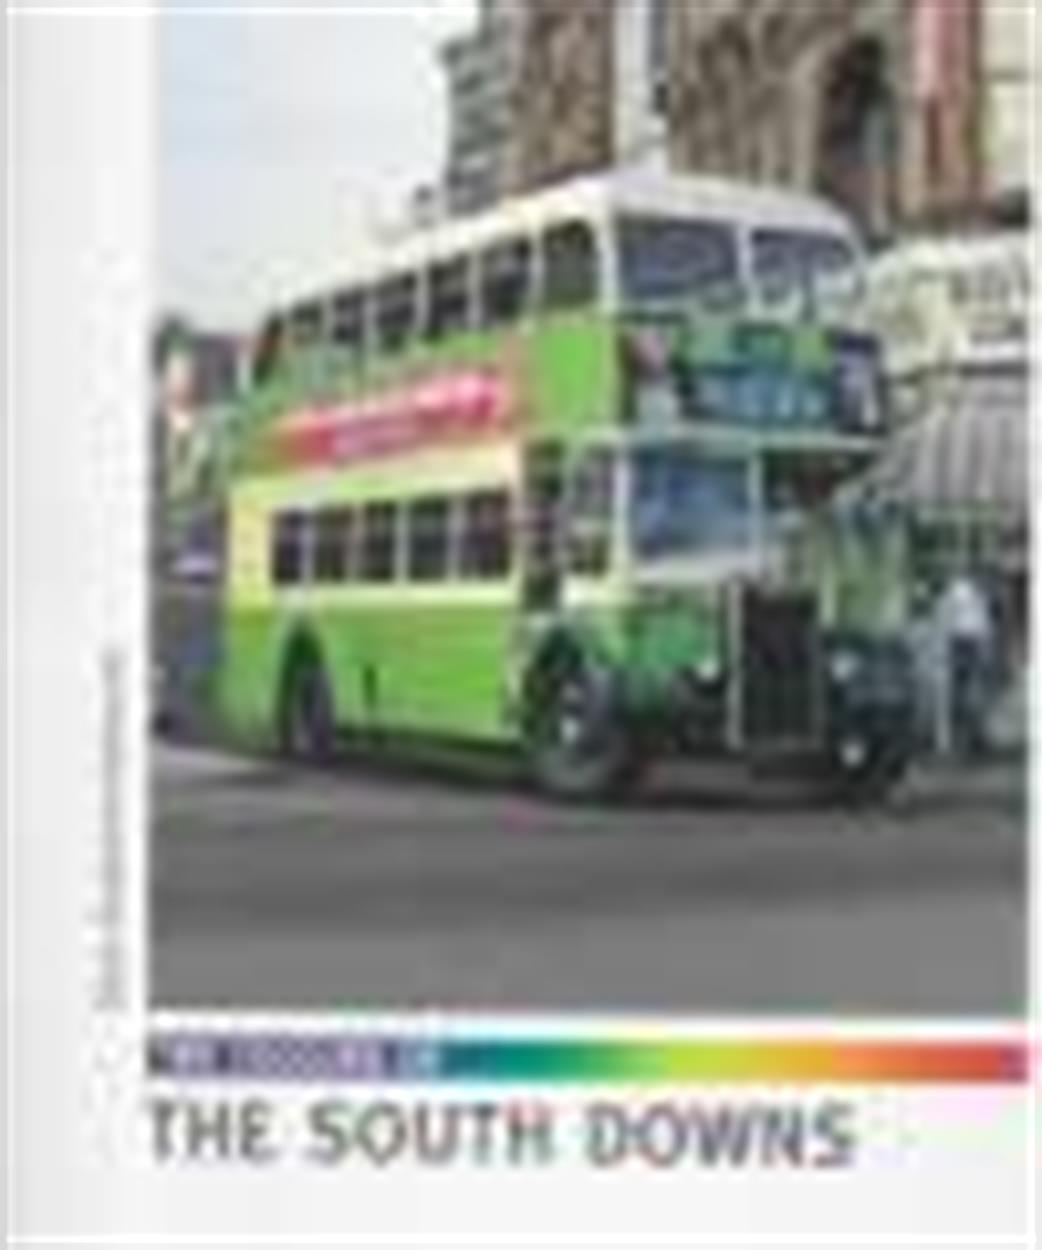 Capital Transport Publishing  9781854143358 Colours of the South Downs by Glyn Kraemer-Johnson